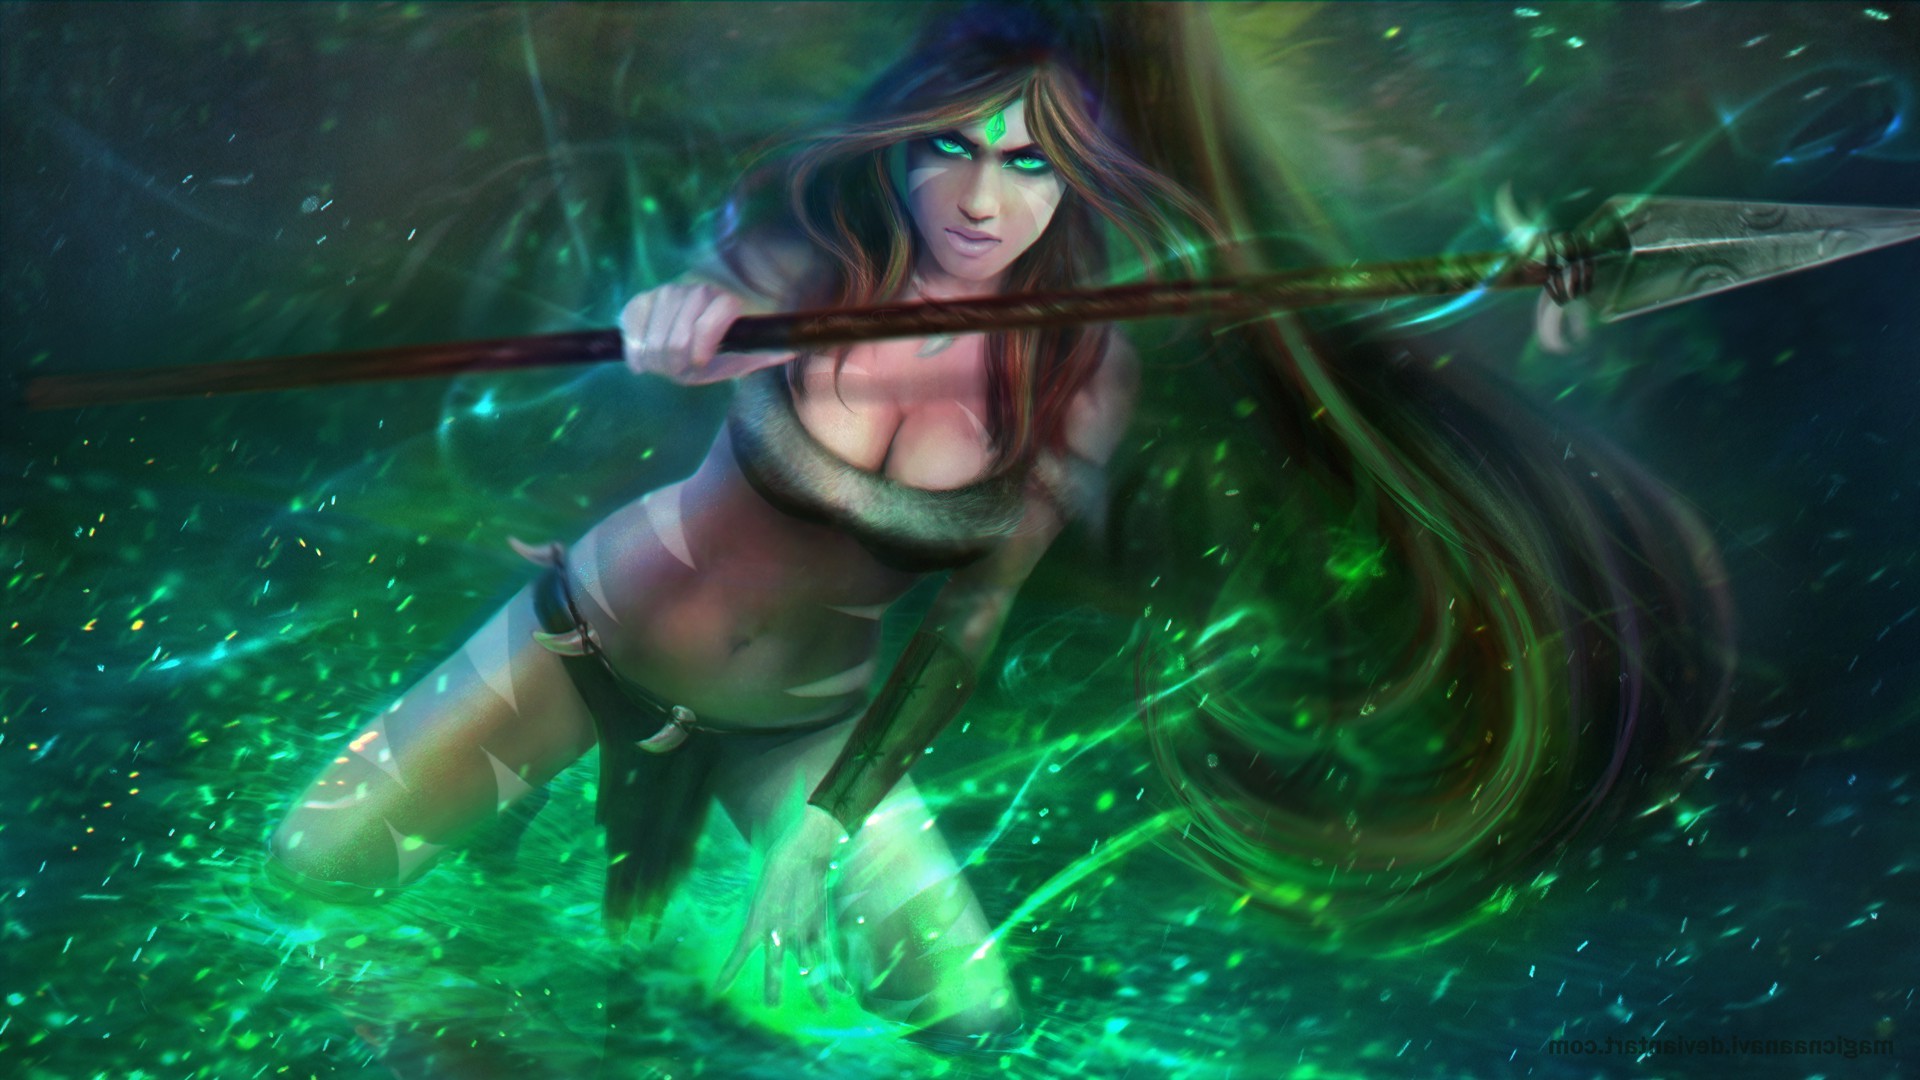 anime Girls, Anime, League Of Legends, Realistic, Nidalee, Riot Games, MagicnaAnavi, Spear Wallpaper